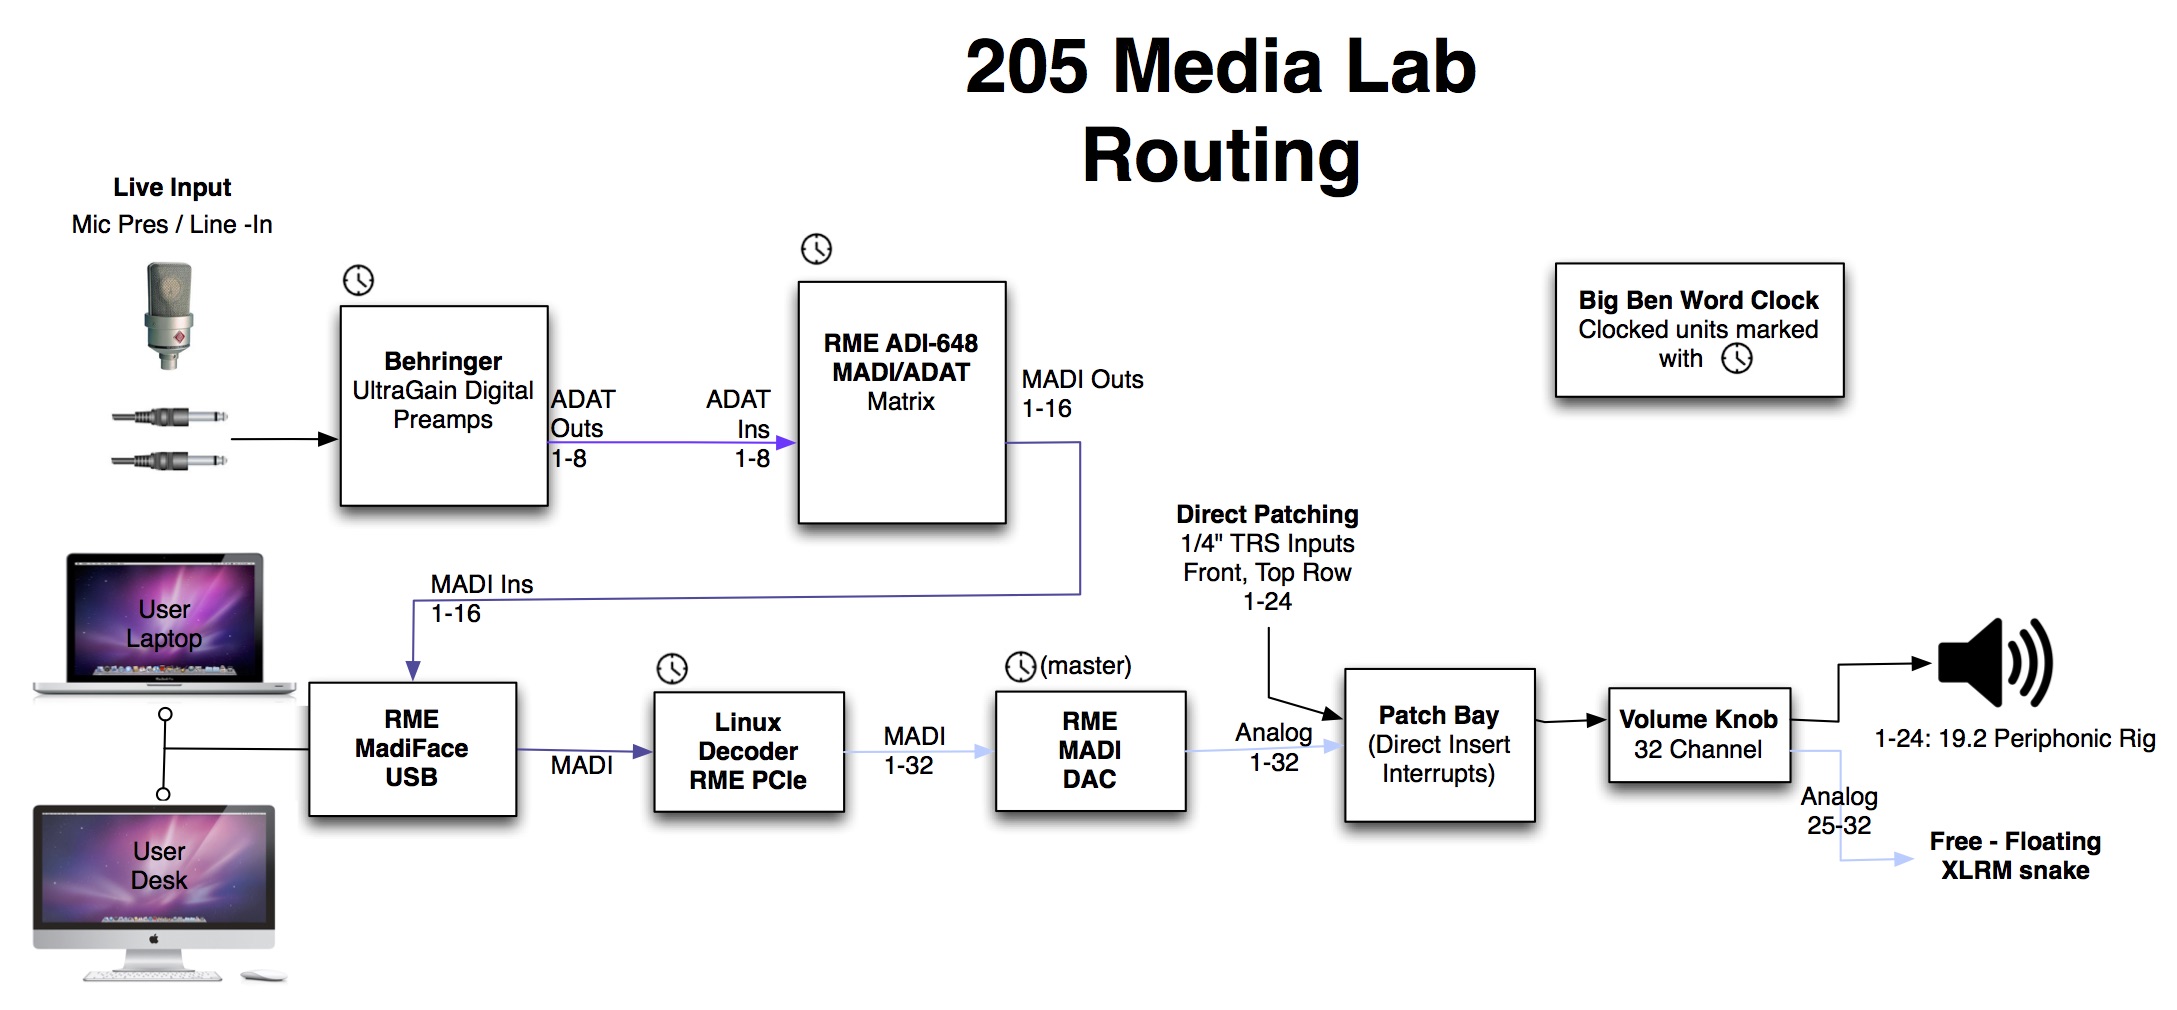 Room 205 Routing Diagram